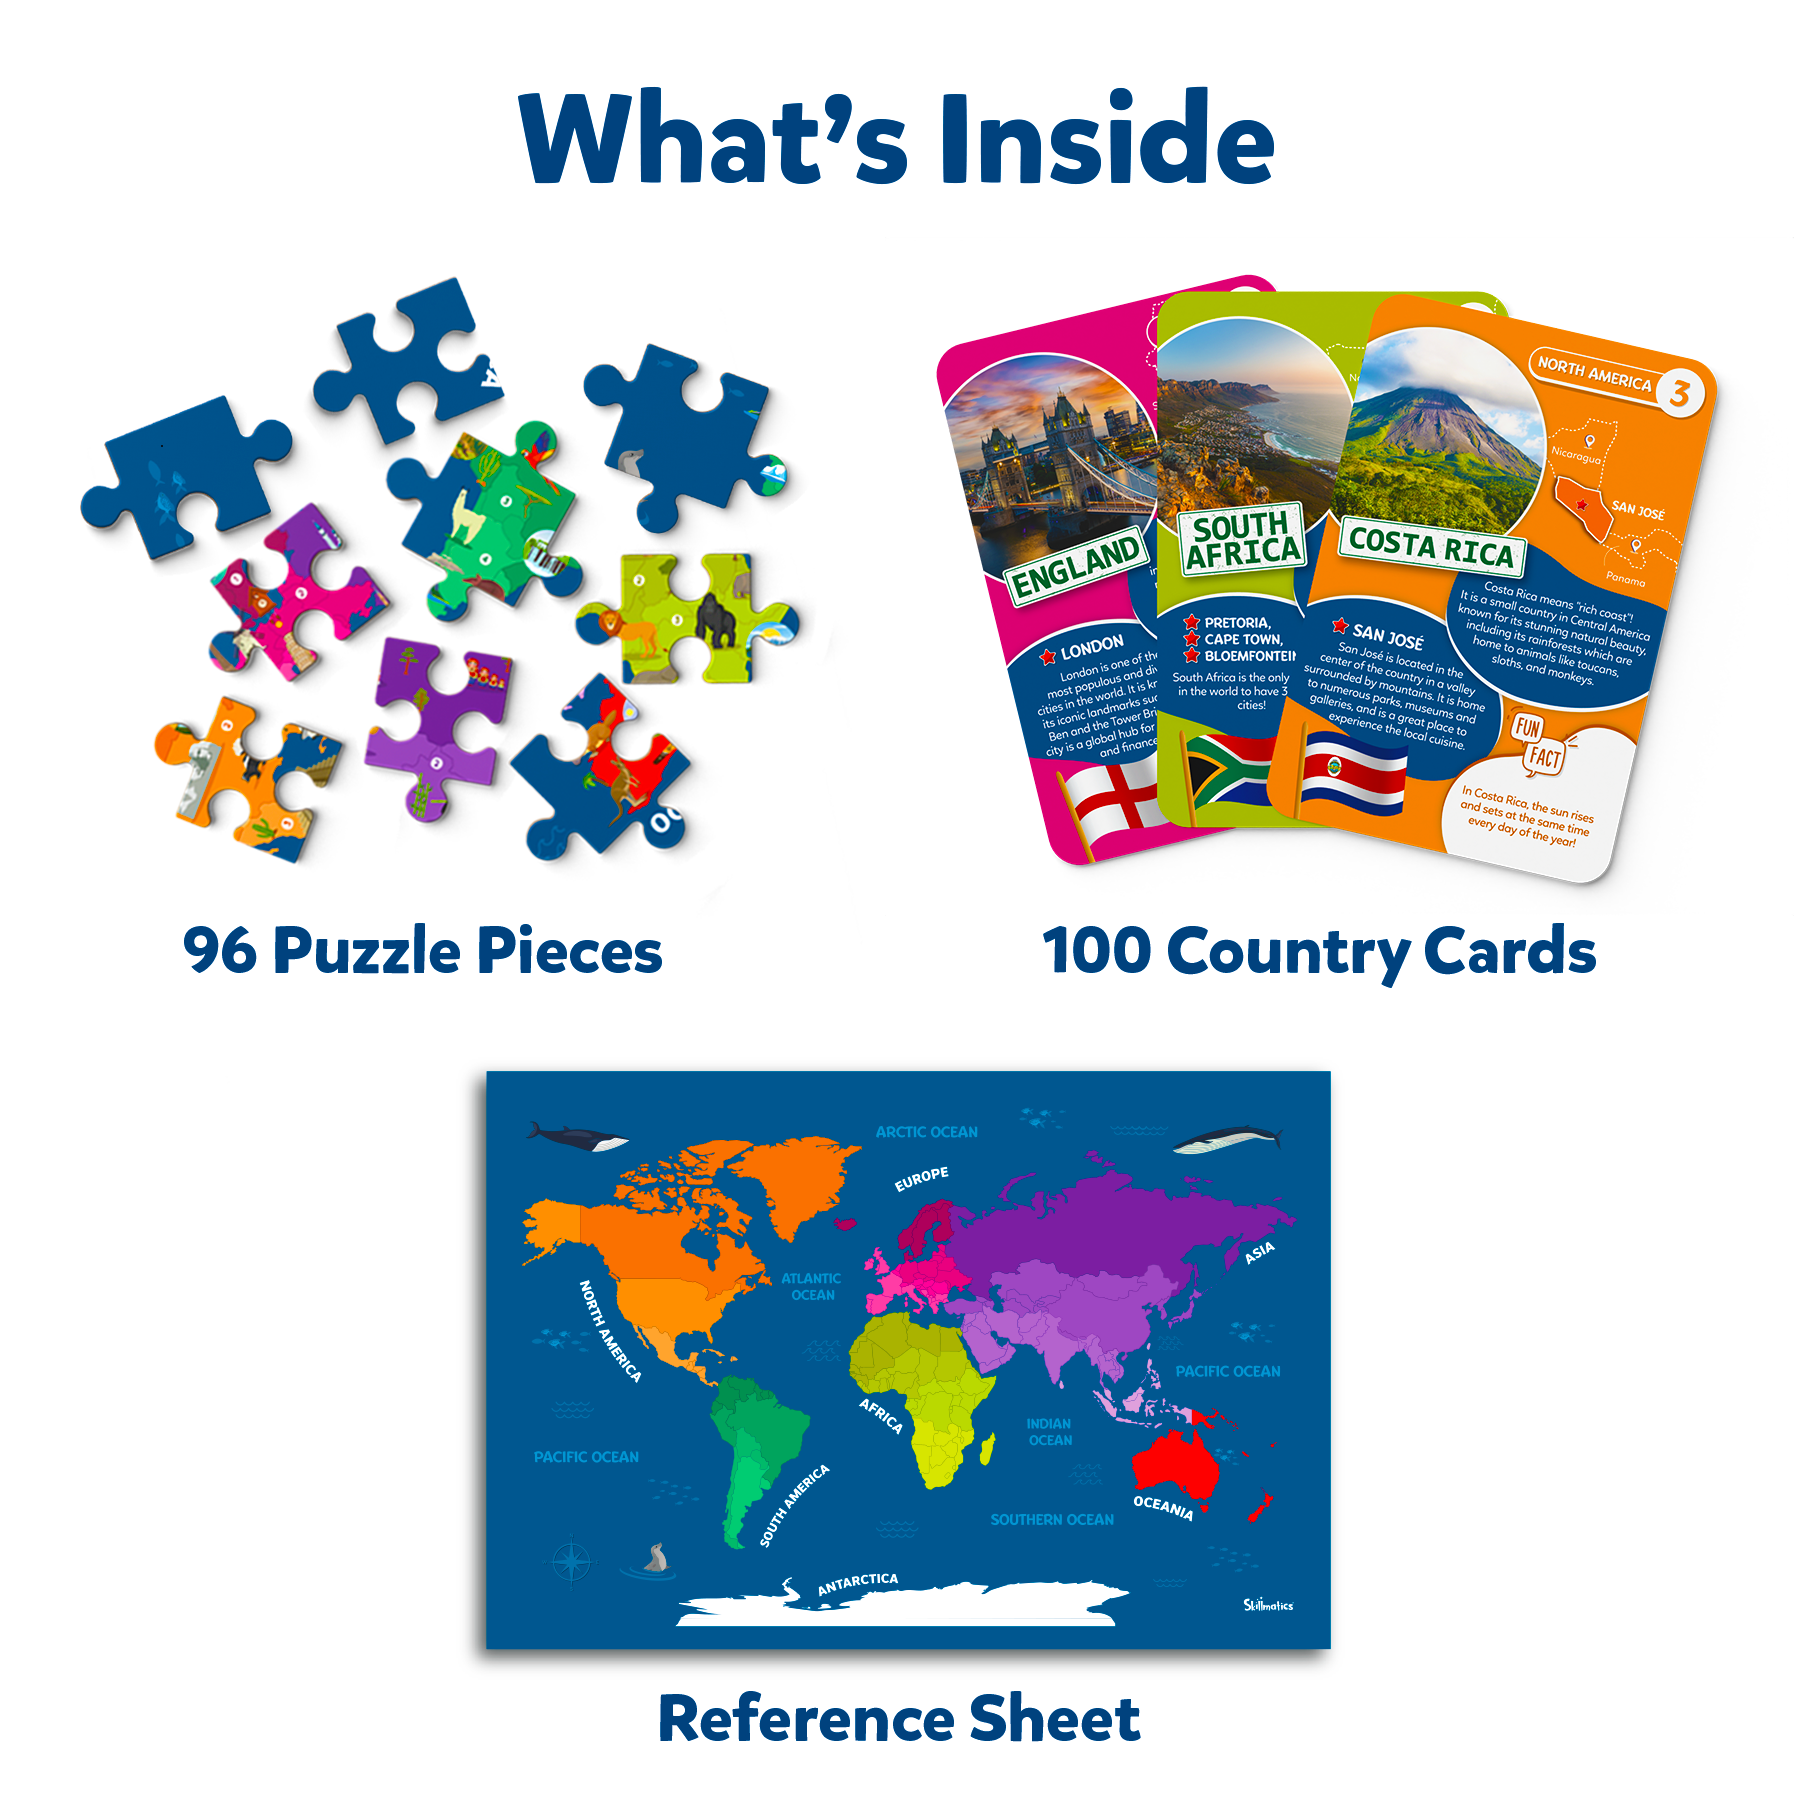 Skillmatics World Map Puzzle - 96 Piece Jigsaw Puzzle, Educational Toy For Learning 400+ Facts About 100 Countries, Gifts For Ages 6 To 12